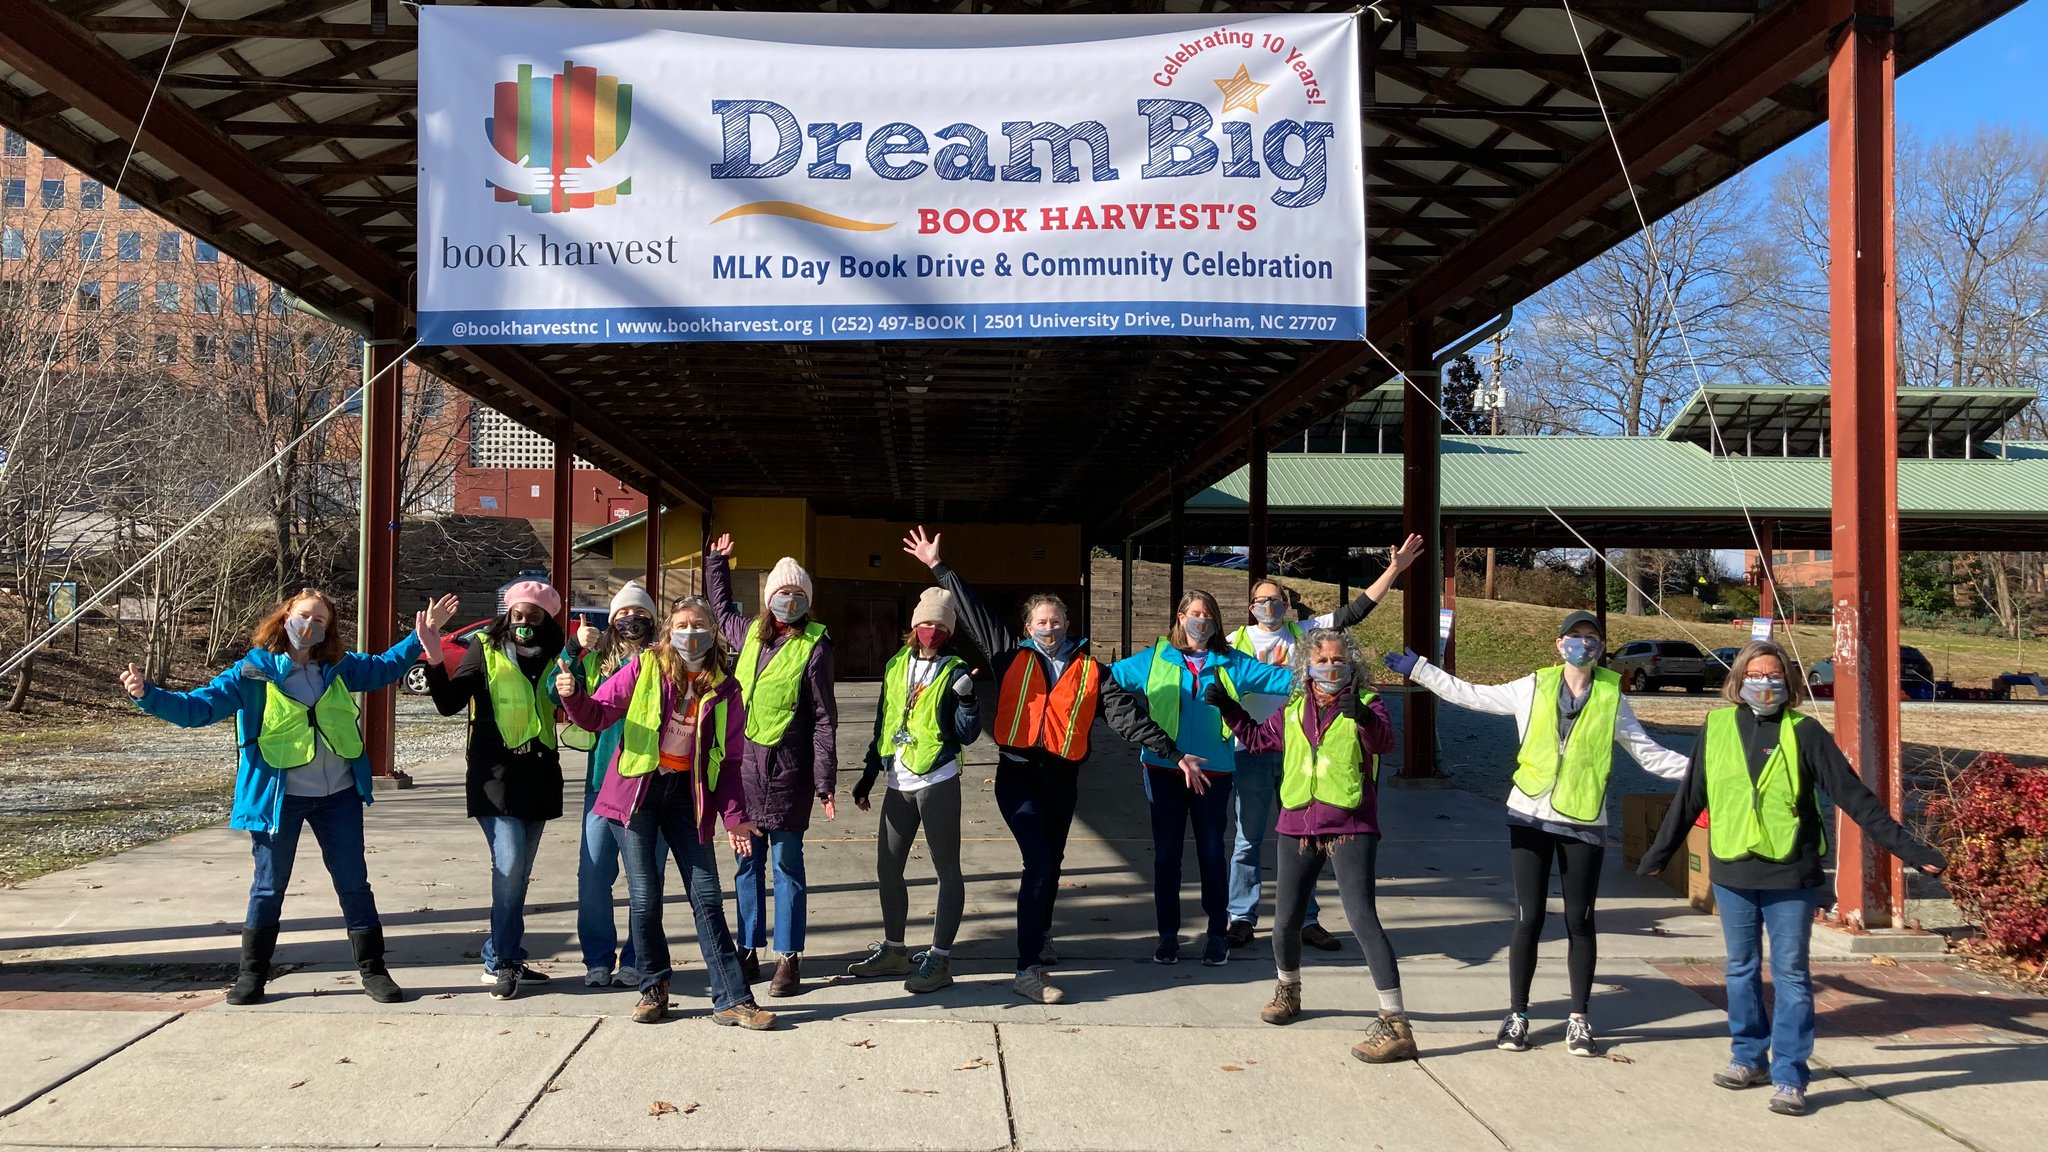 We’re proud of our #GSKimpact Award winner, @BookHarvestNC, and their annual #MLKDay Dream Big Book Drive in Durham, NC. Learn about the event and its impact on #literacy https://t.co/W5Ej905QYI 📚⭐️ @TheRTP https://t.co/WetCJcMalU